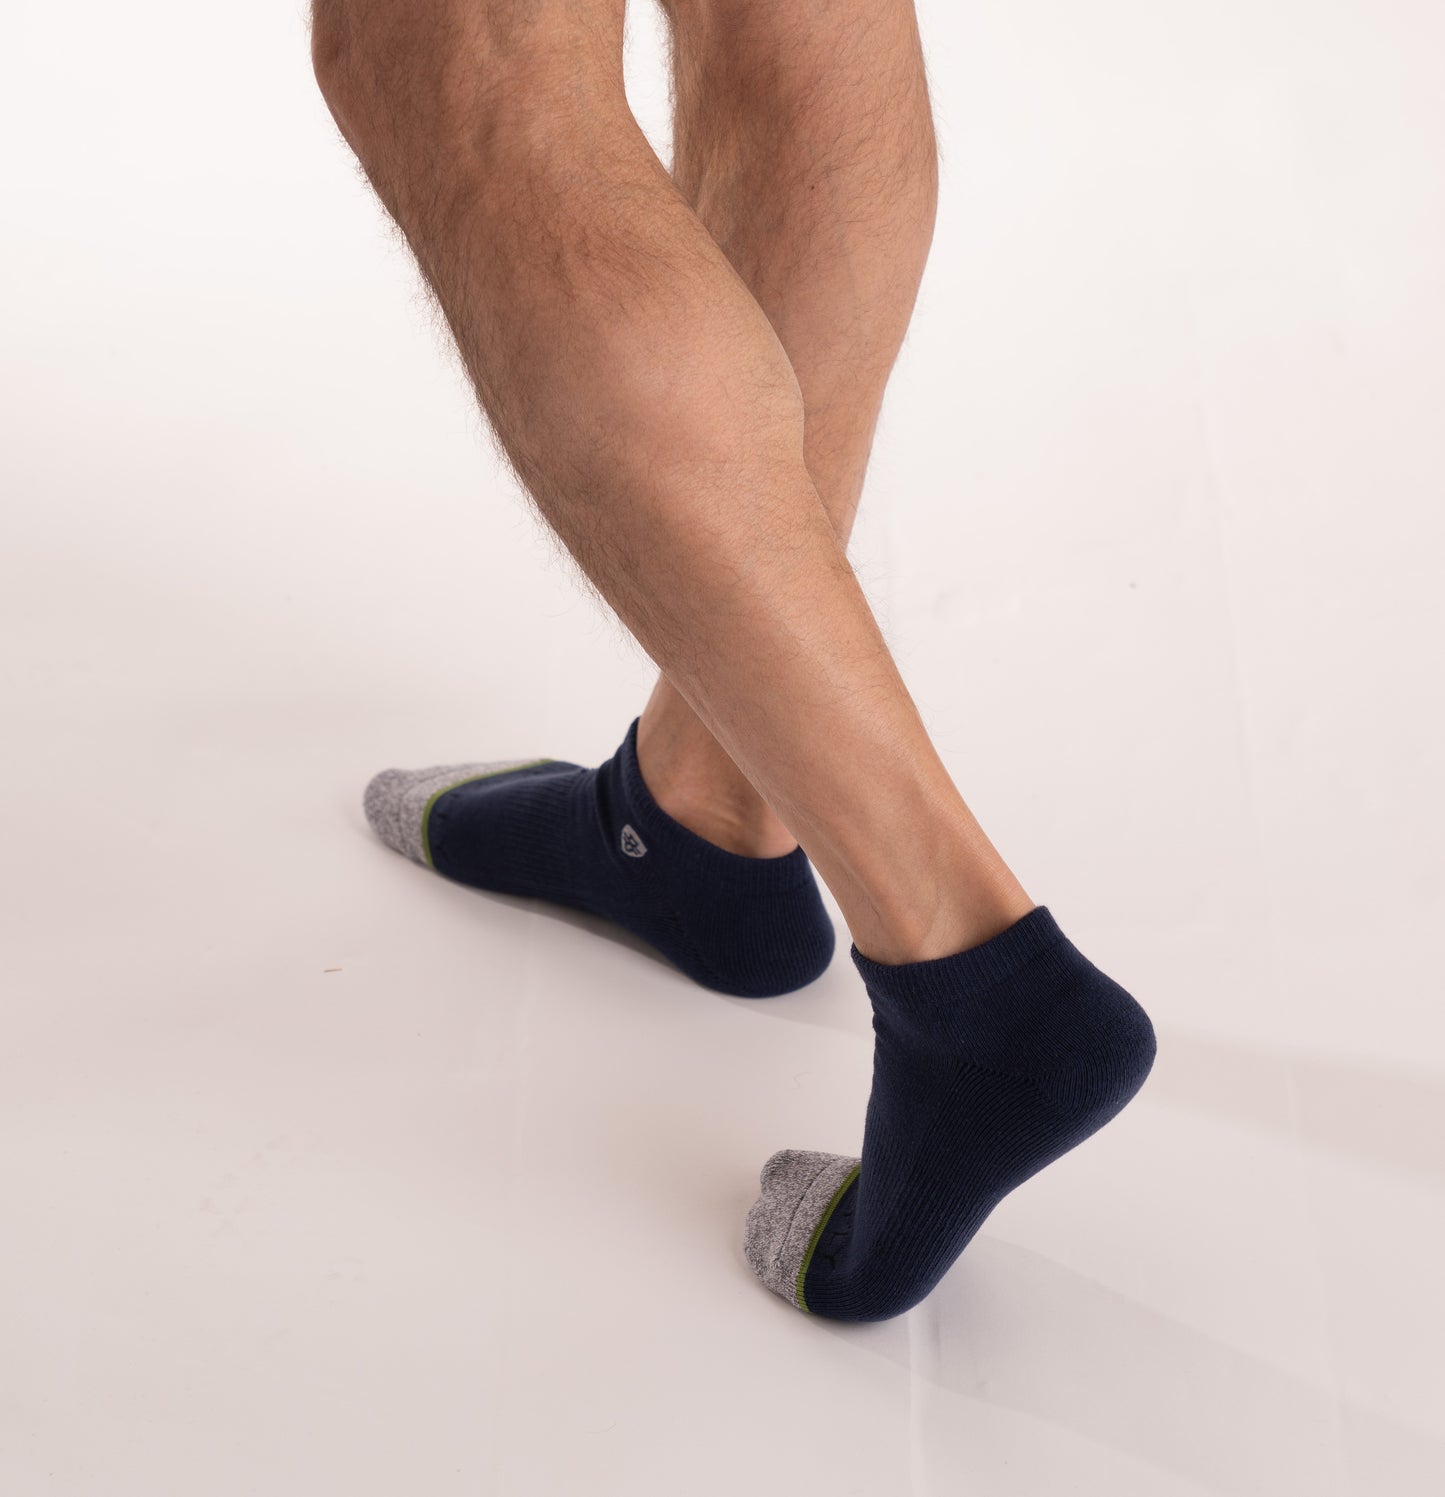 Crossfly men's Original Low Socks in navy from the Everyday series, featuring Flat Toe Seams and 360 Hold.